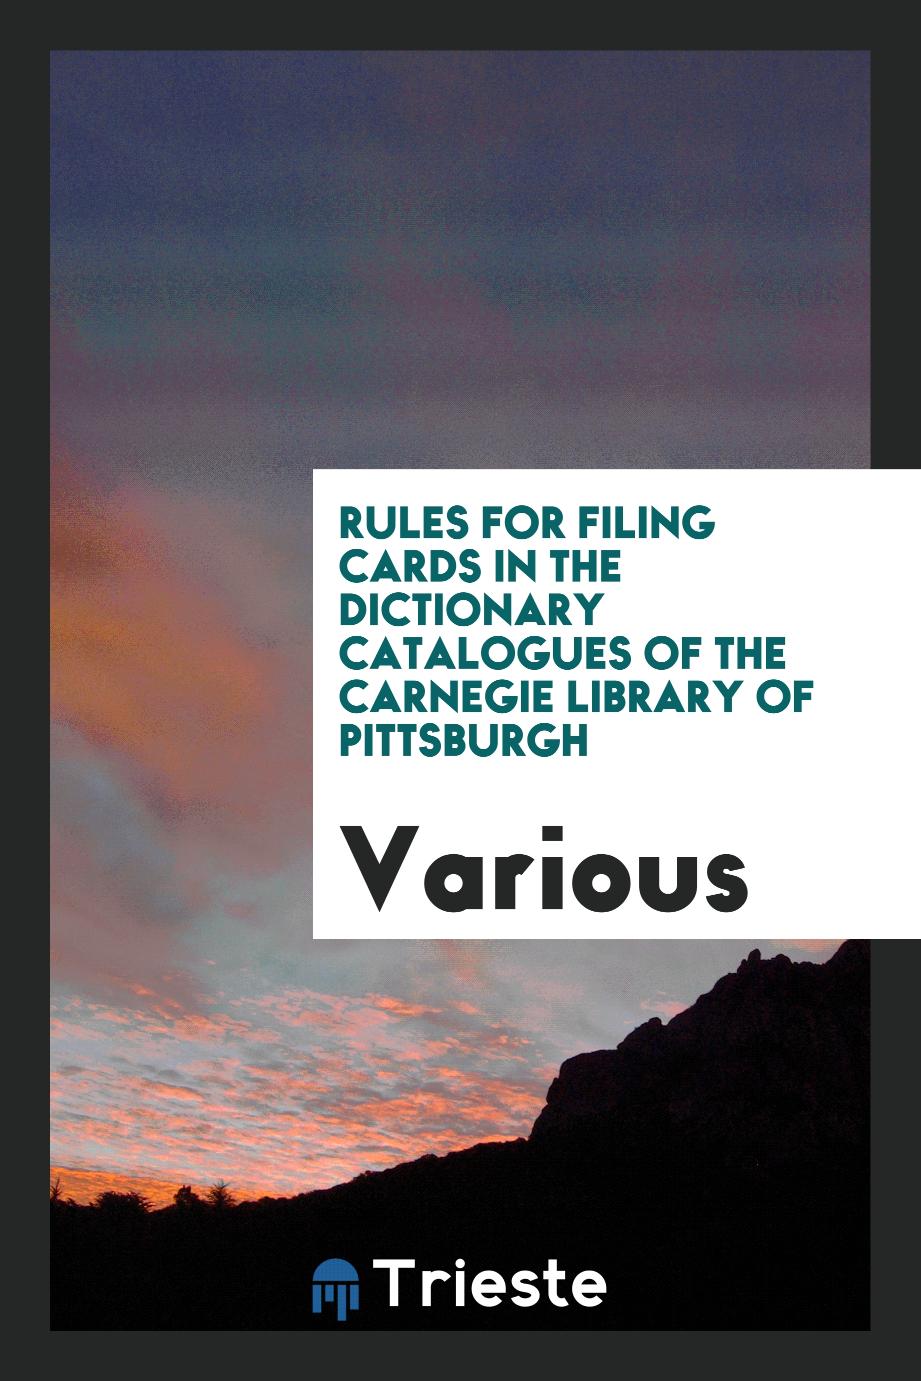 Rules for filing cards in the dictionary catalogues of the Carnegie library of Pittsburgh